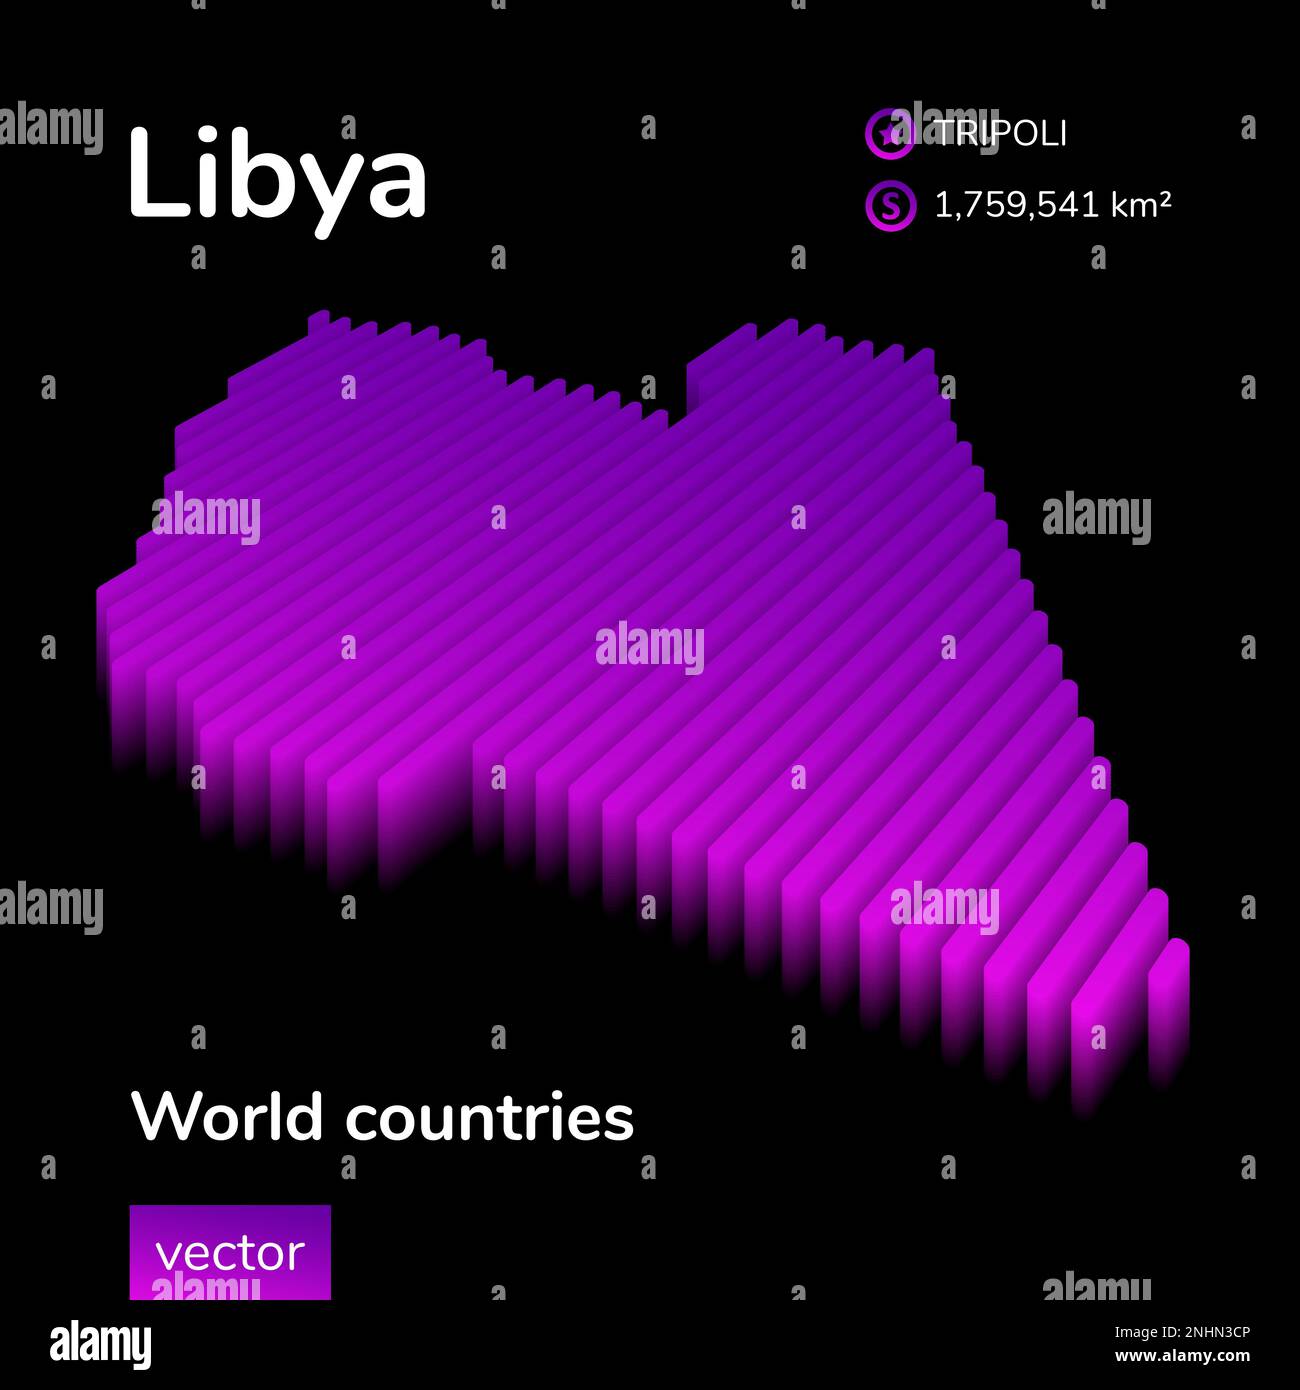 Vector Libya 3D map in violet colors on black background. Isometric map illustration. Striped vector map icon. Stock Vector